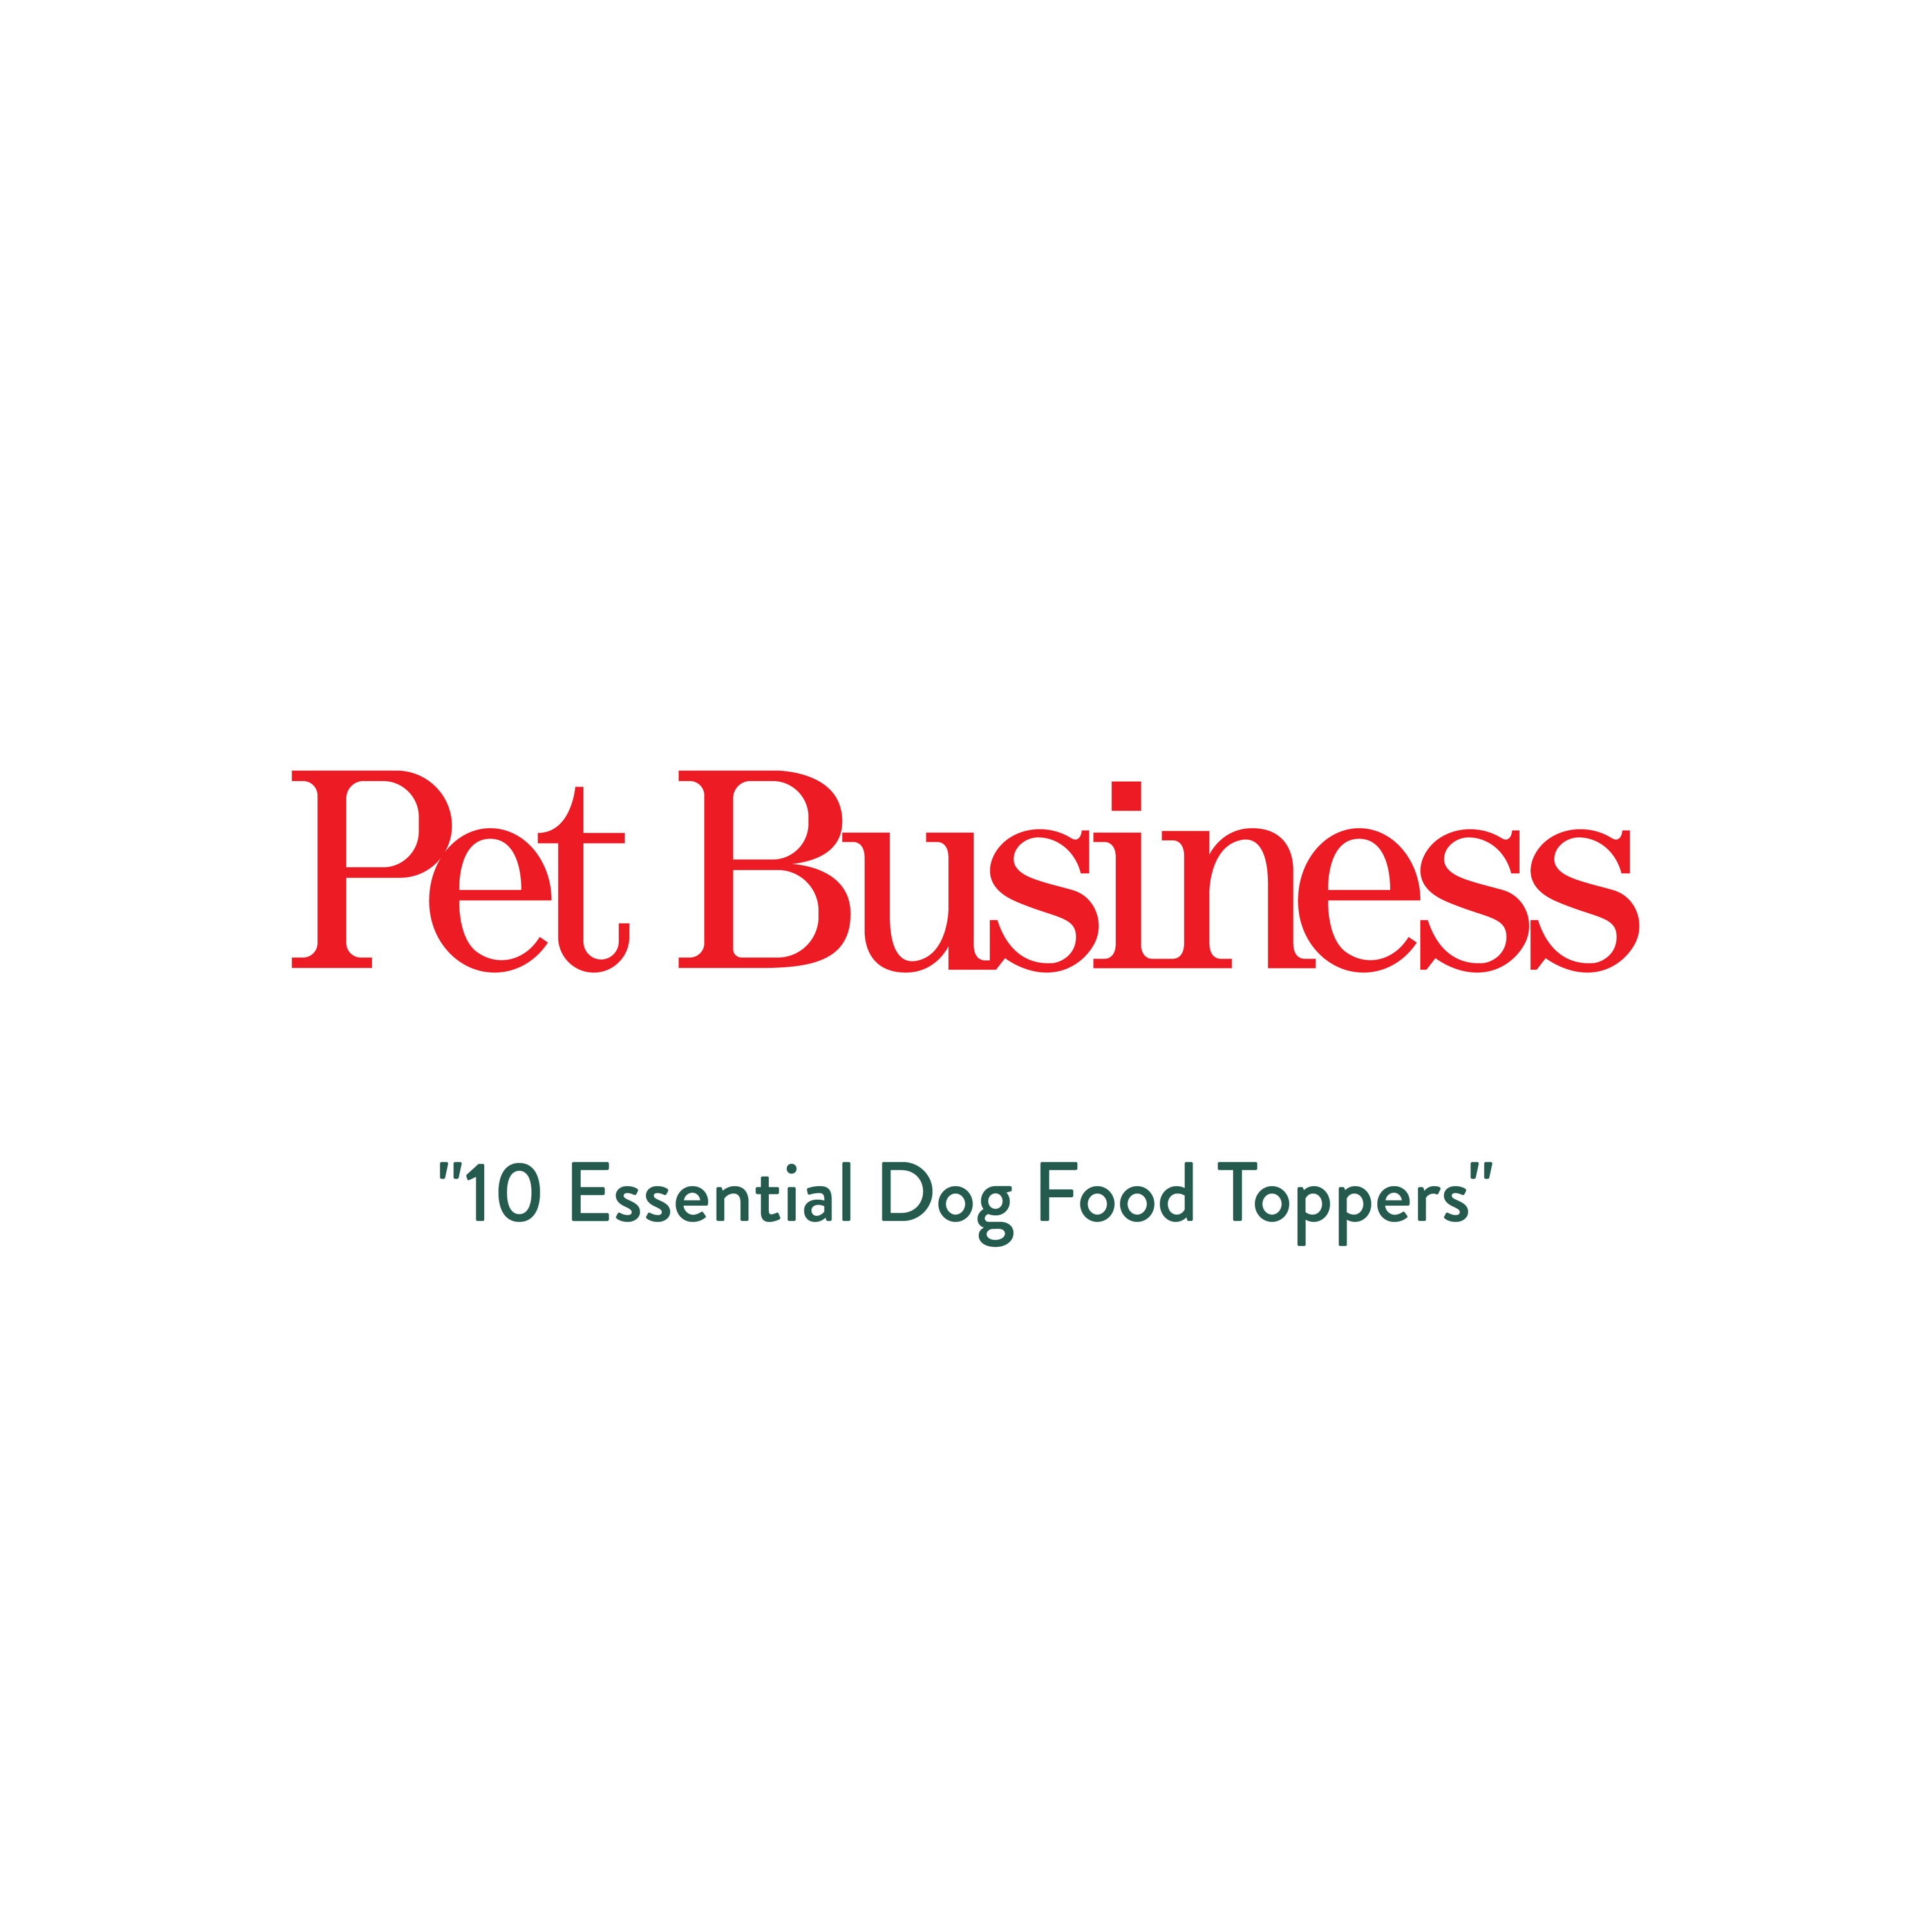 Ranked as one of the 10 essential dog food toppers by Pet Business